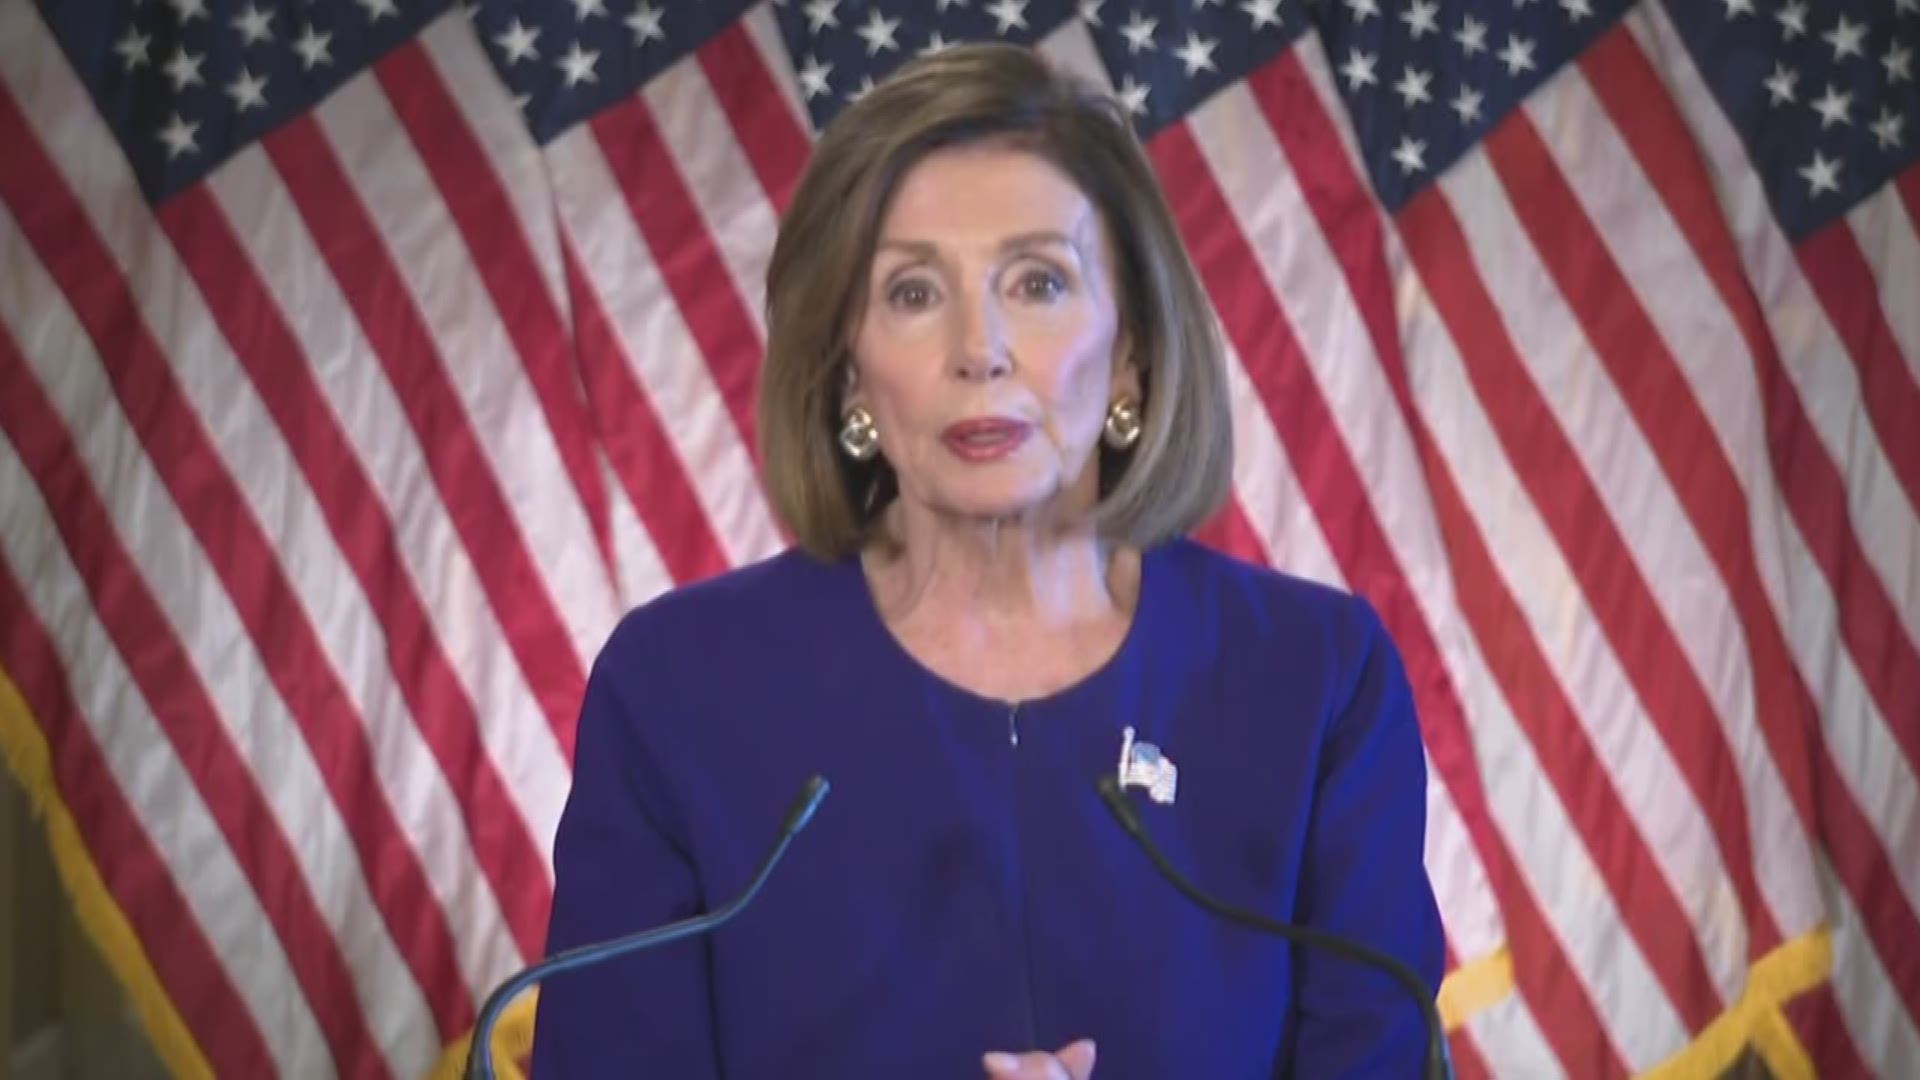 U.S. House Speaker Pelosi announces the House is moving forward with official impeachment inquiry, says 'no one is above the law'